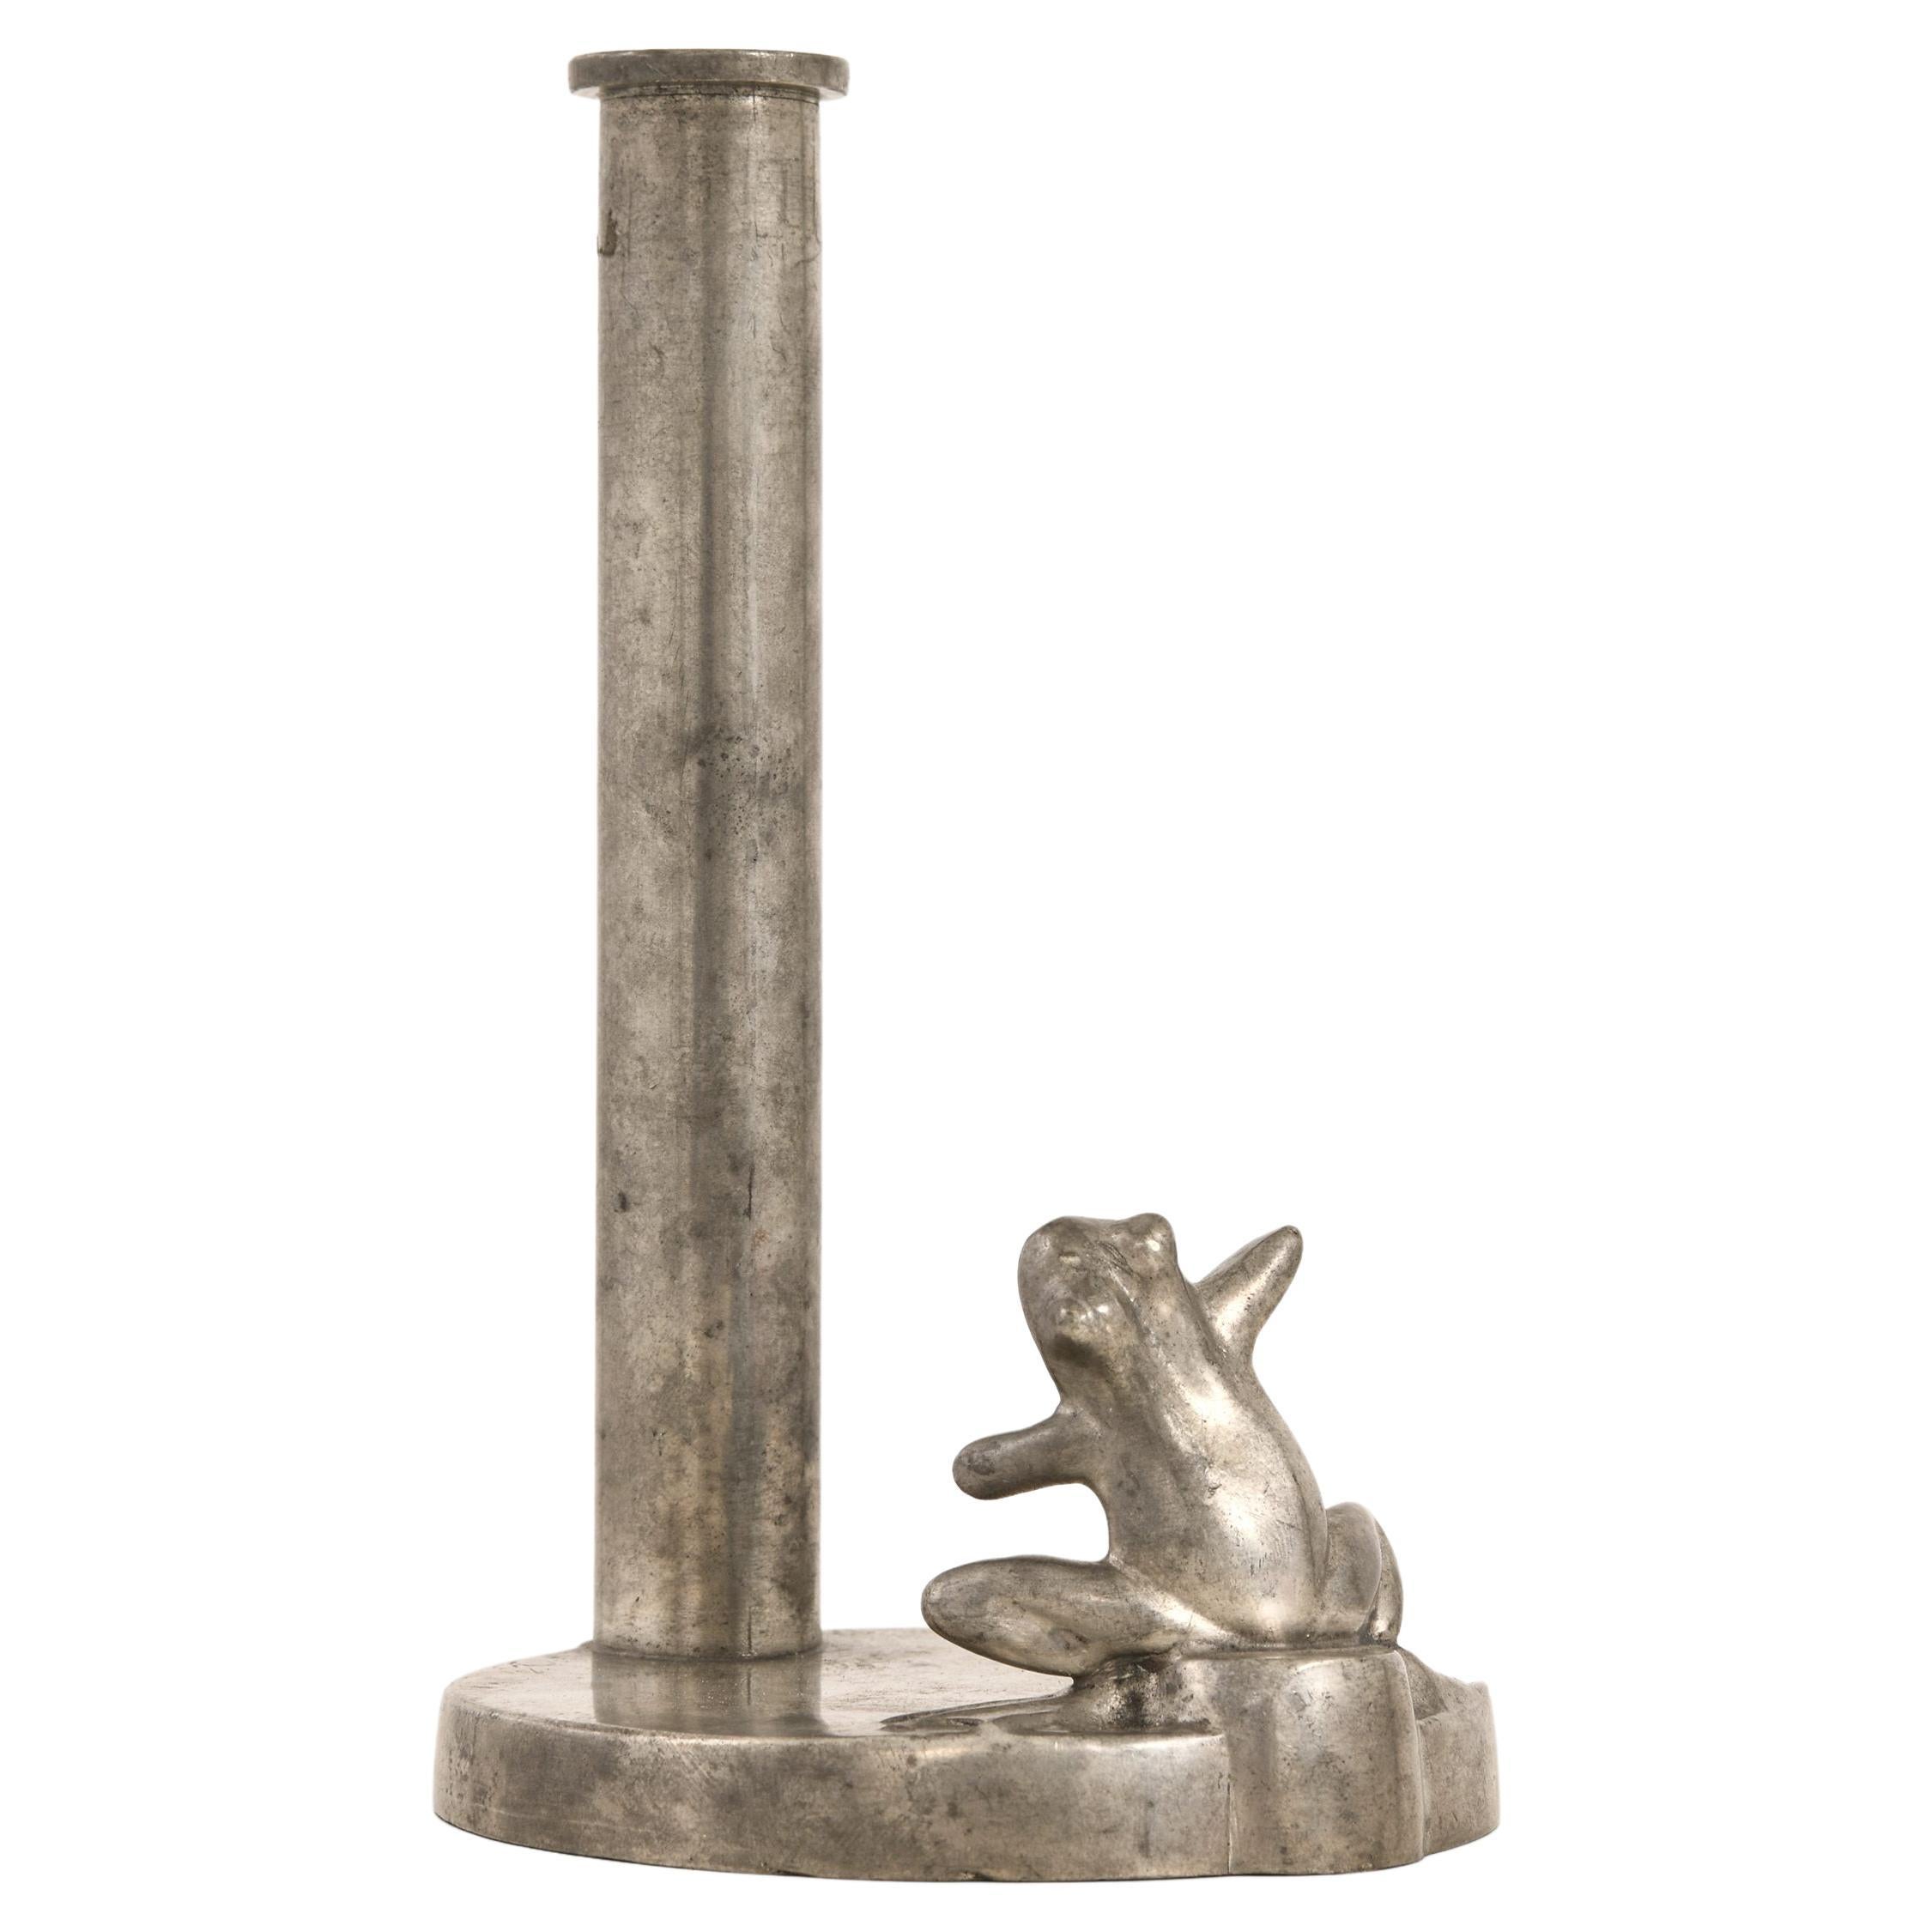 Art Deco Candlestick with Frog in Pewter, 1934